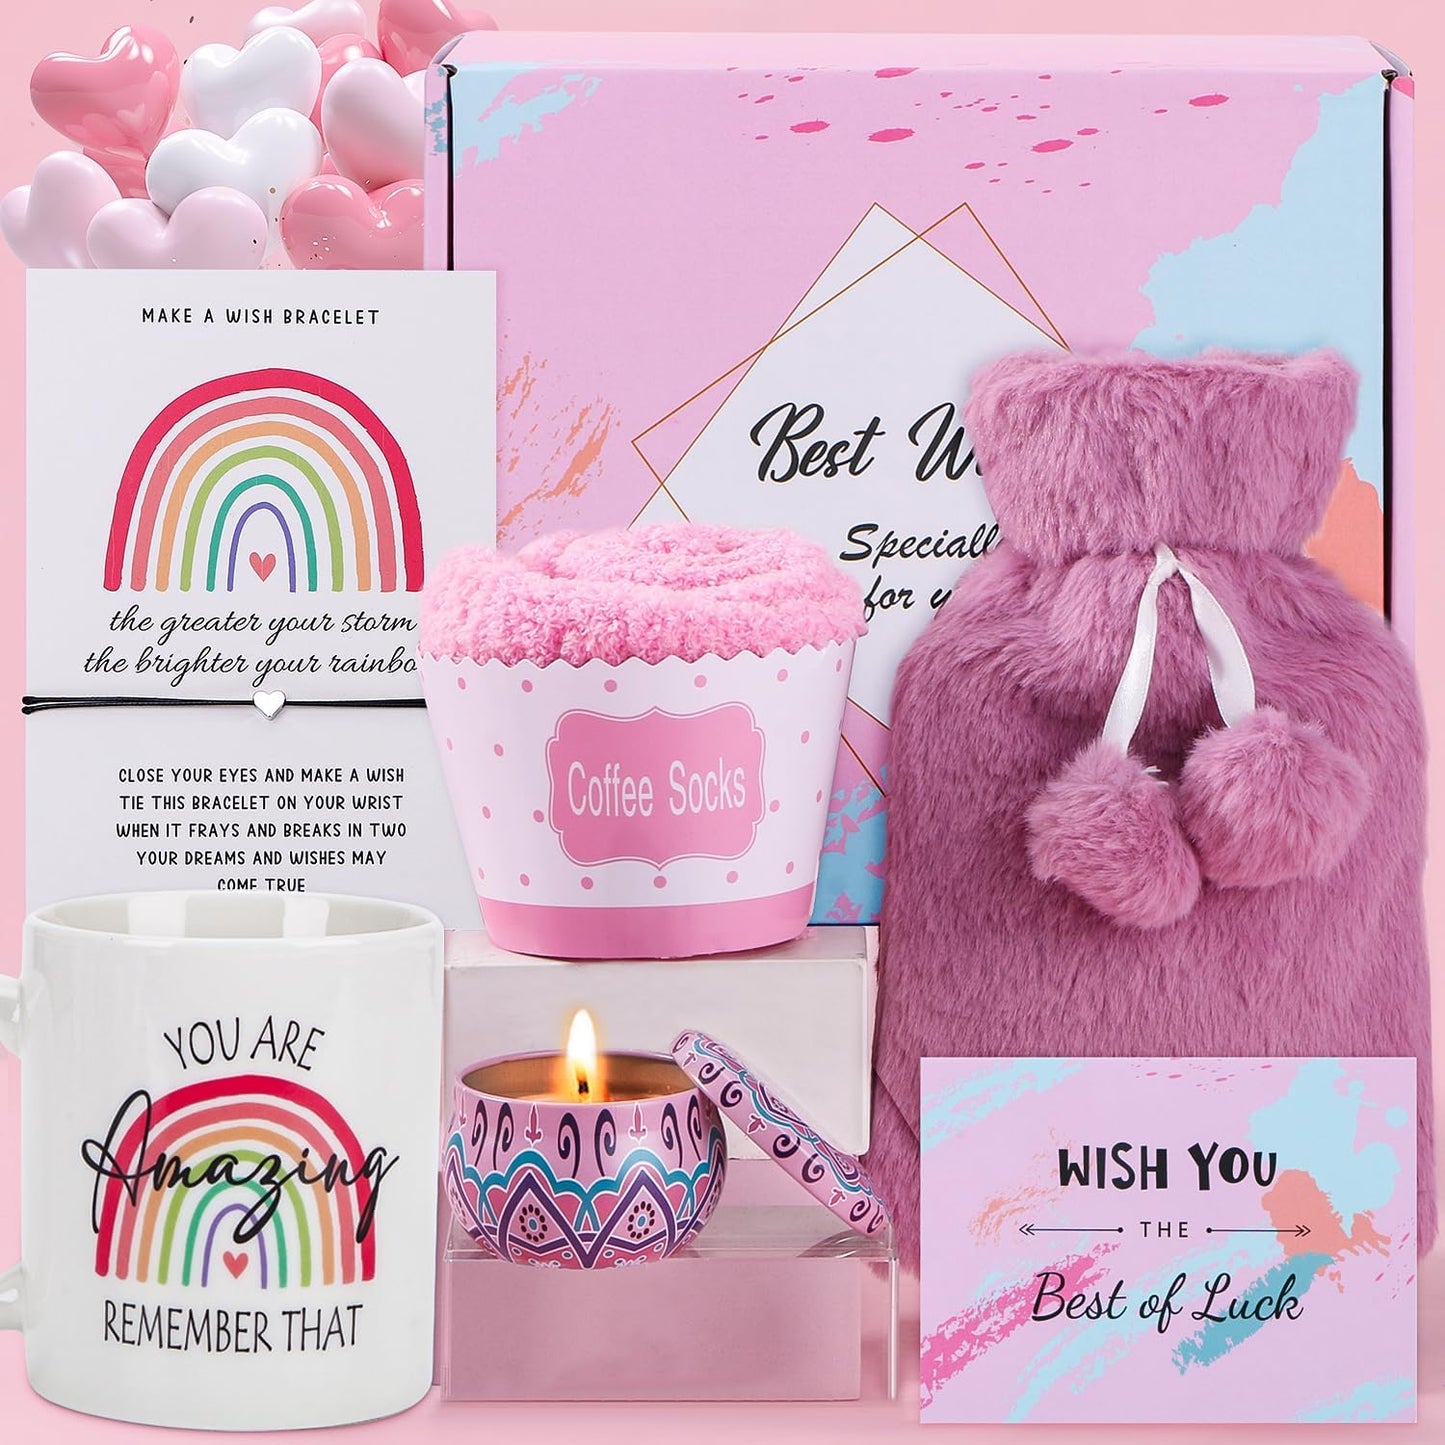 Christmas Gifts for Women, Birthday Gifts for Women, Ideas Presents for Her, Mum,Sister,Friends,Daughter, Warm&Relaxing Winter Care Package for Women, Hot Water Bottle Gift Set with Mug,Candle,Socks